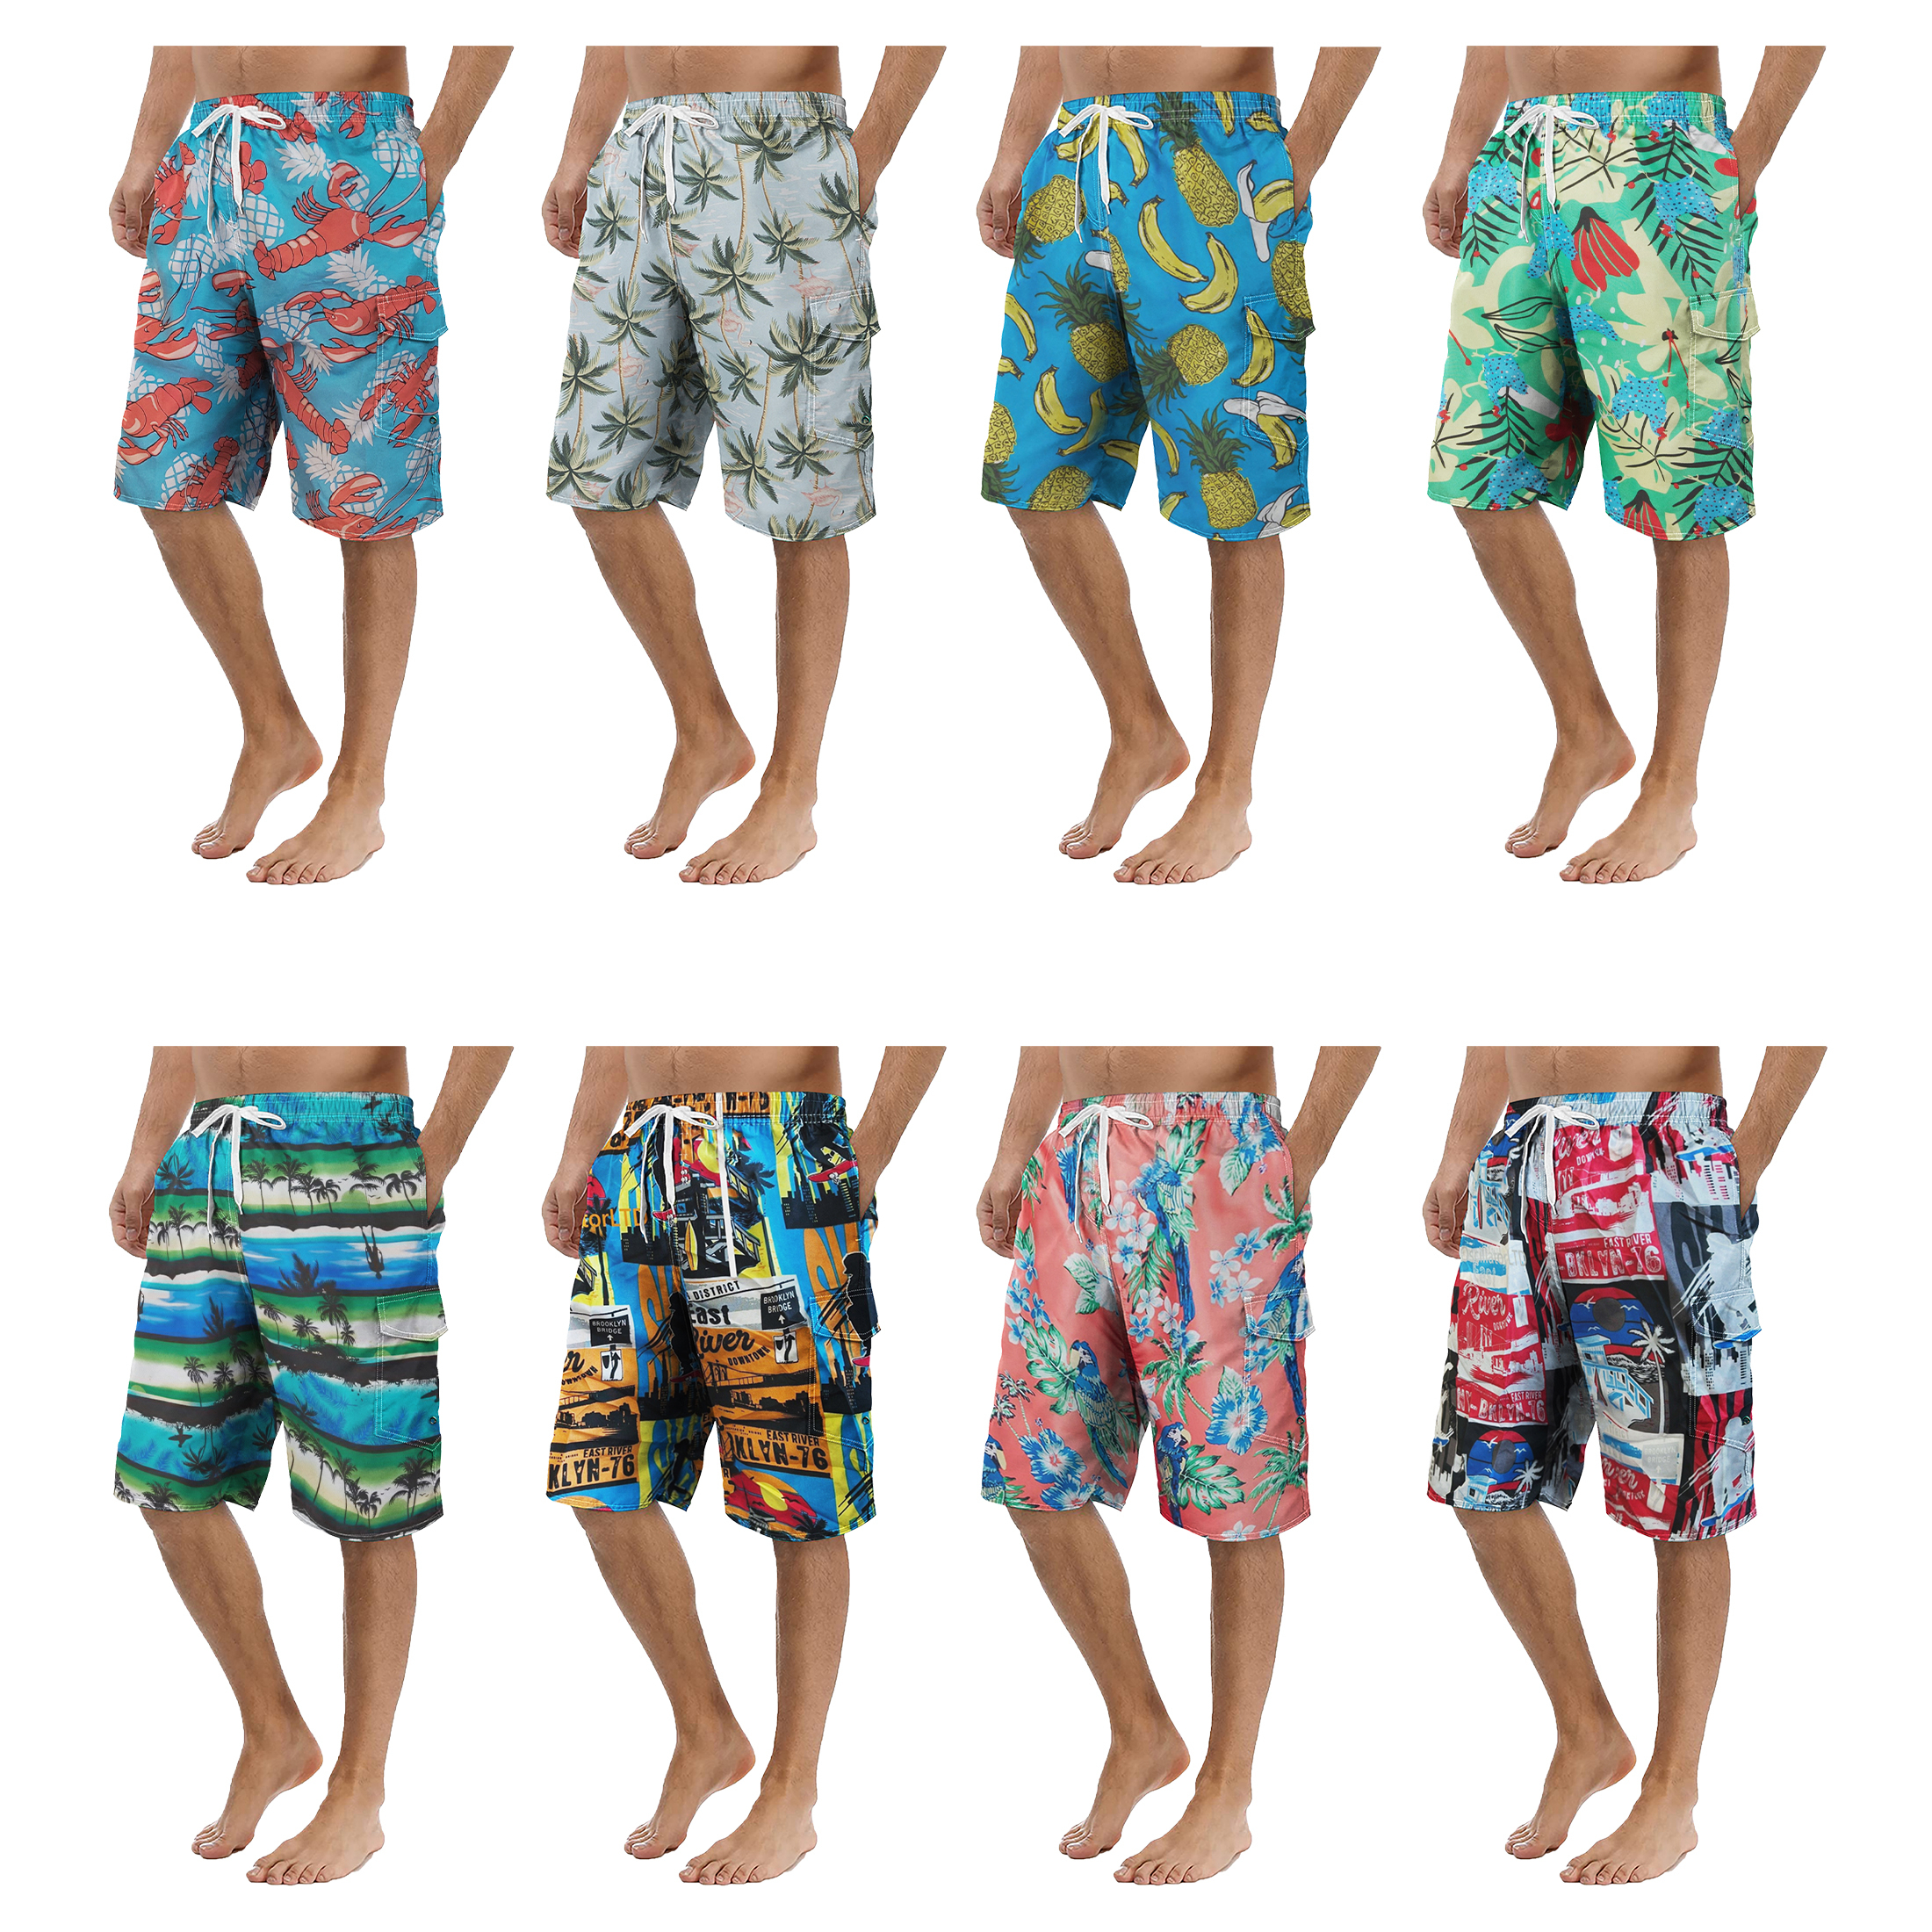 2-Pack Men's Quick Dry Printed Cargo Swim Shorts With Pockets Regular Flex Bathing Board Suits & Trunks - L